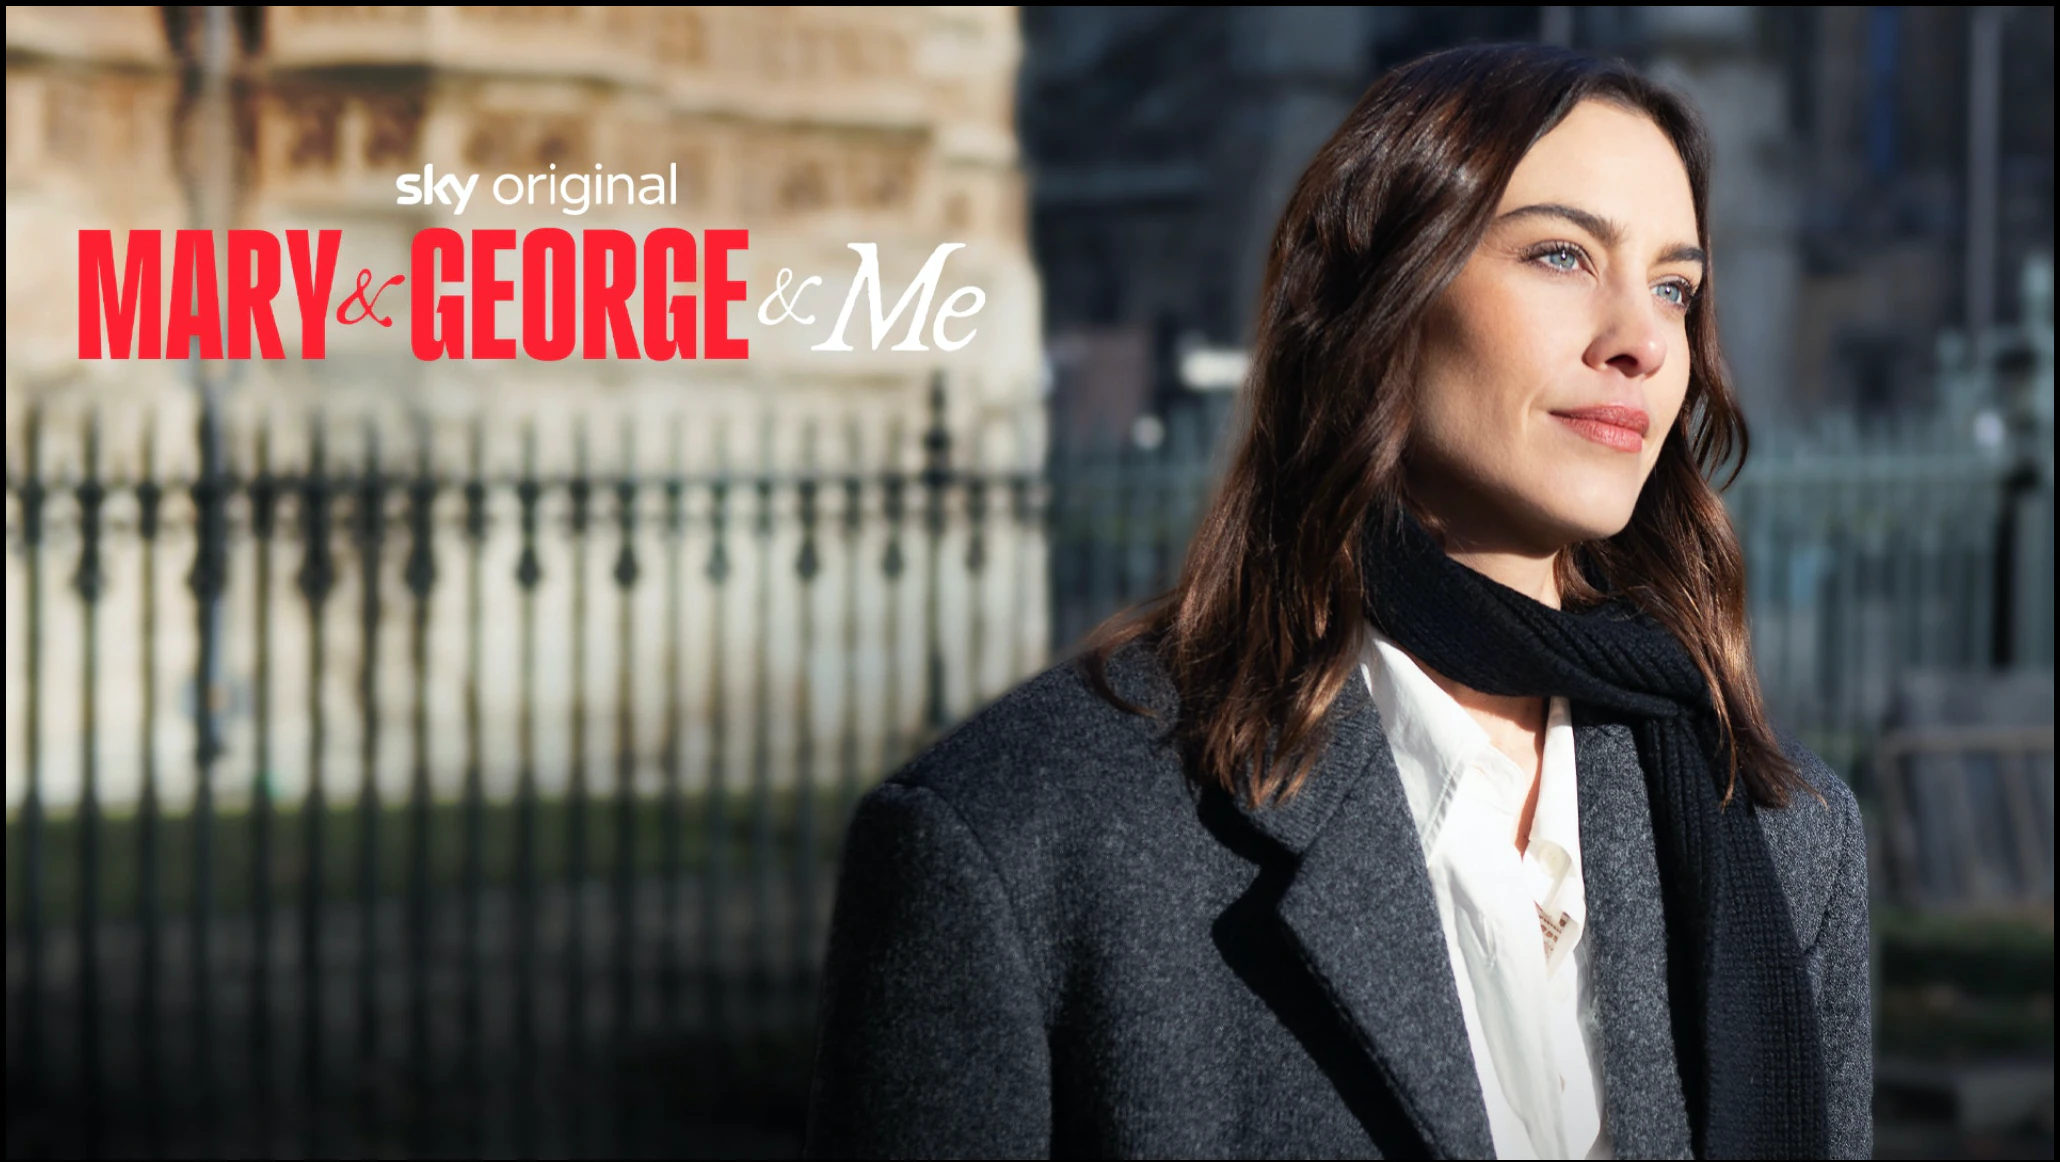 Alexa Chung hosts Mary & George & Me, a companion documentary to Mary & George series out March 12